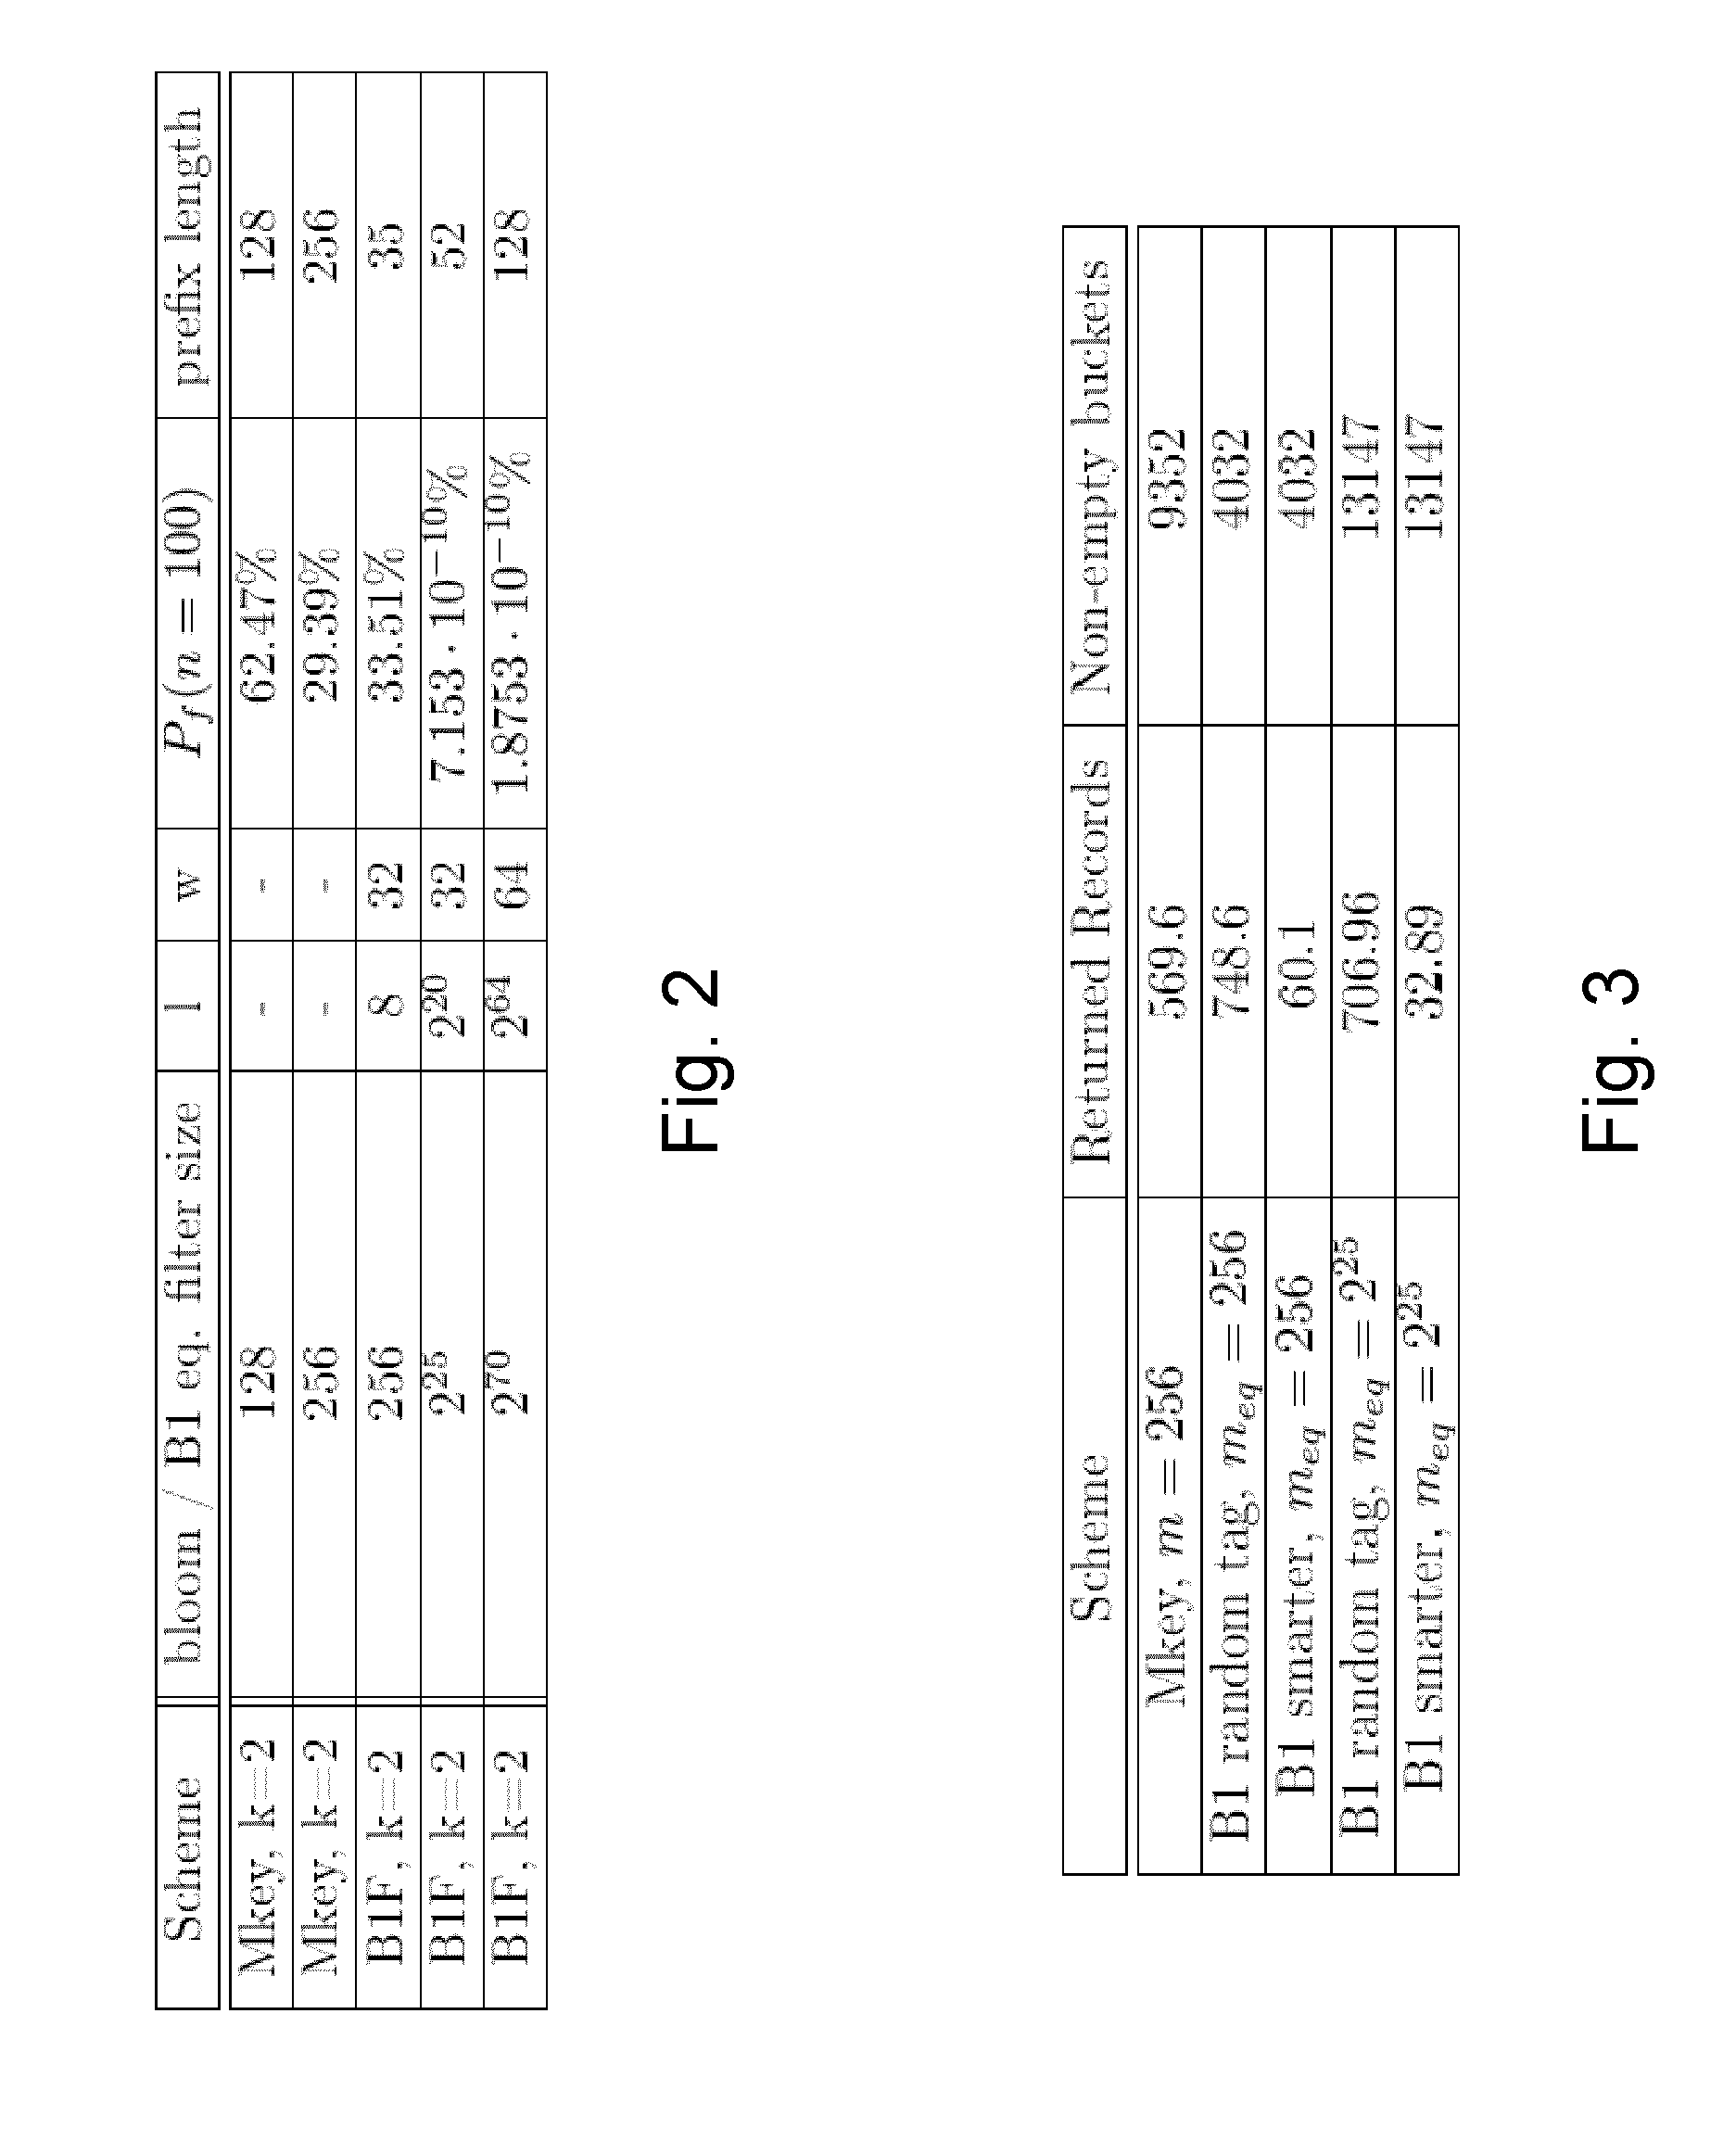 Method for storing and searching tagged content items in a distributed system